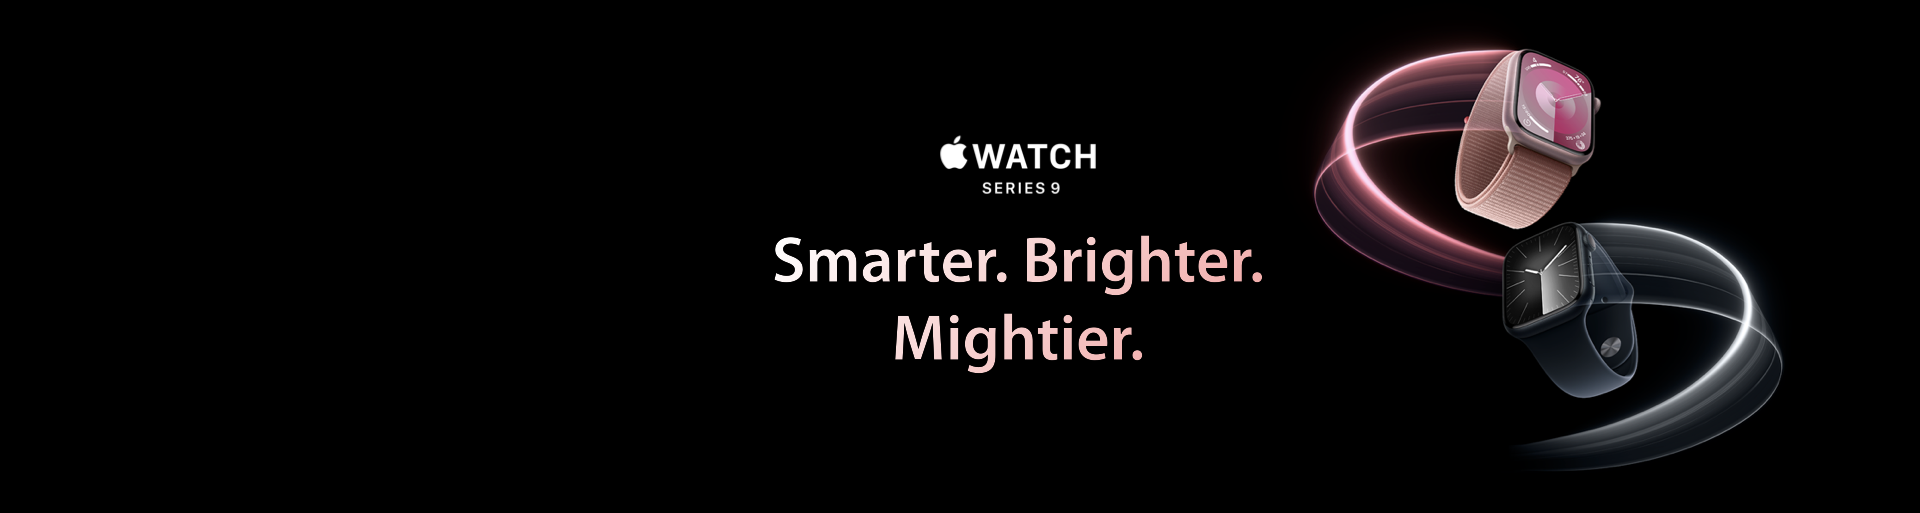 Apple Watch Series 9. Smarter. Brighter. Mighter.